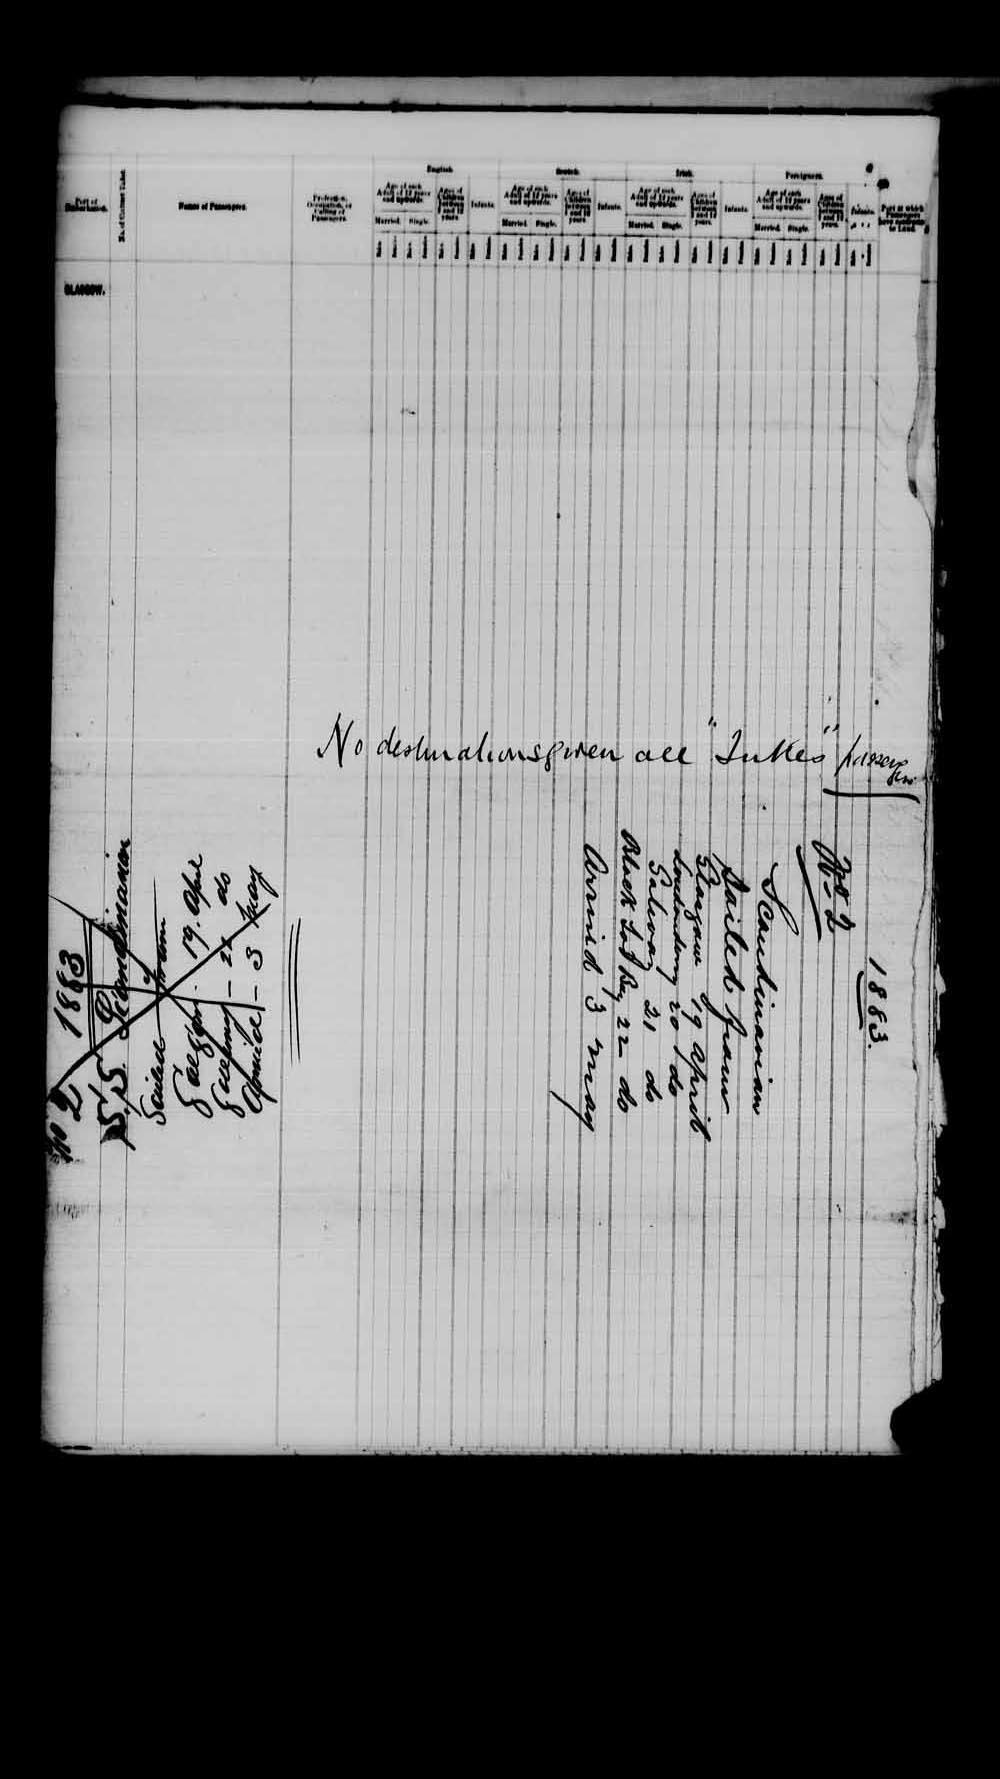 Digitized page of Passenger Lists for Image No.: e003542683